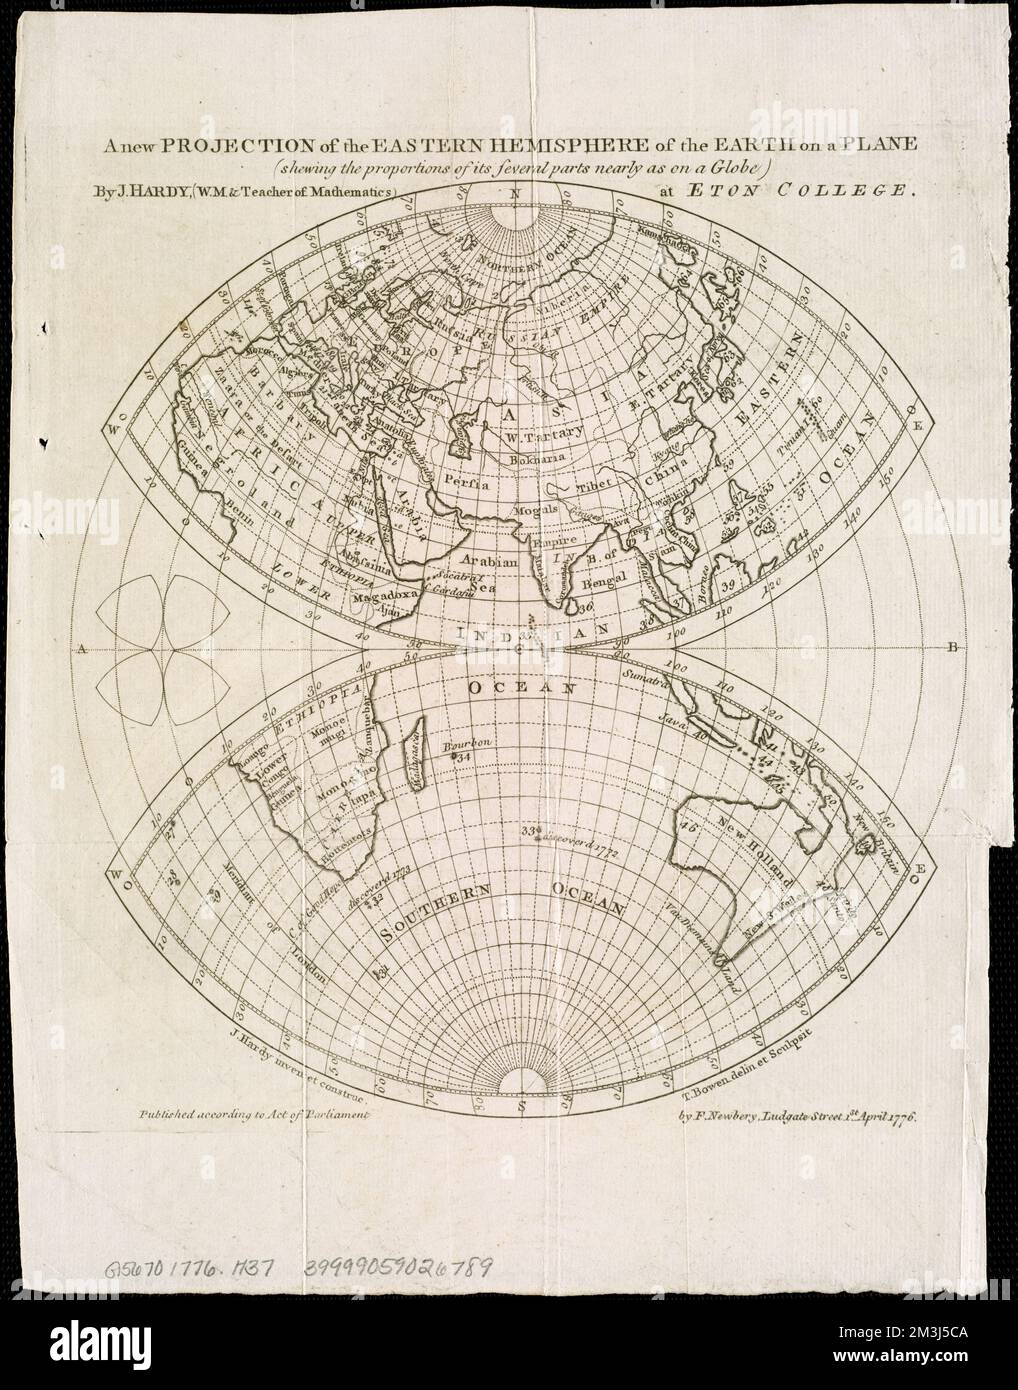 A new projection of the Eastern Hemisphere of the earth on a plane : shewing the proportions of its several parts nearly as on a globe , Eastern Hemisphere, Maps, Early works to 1800 Norman B. Leventhal Map Center Collection Stock Photo